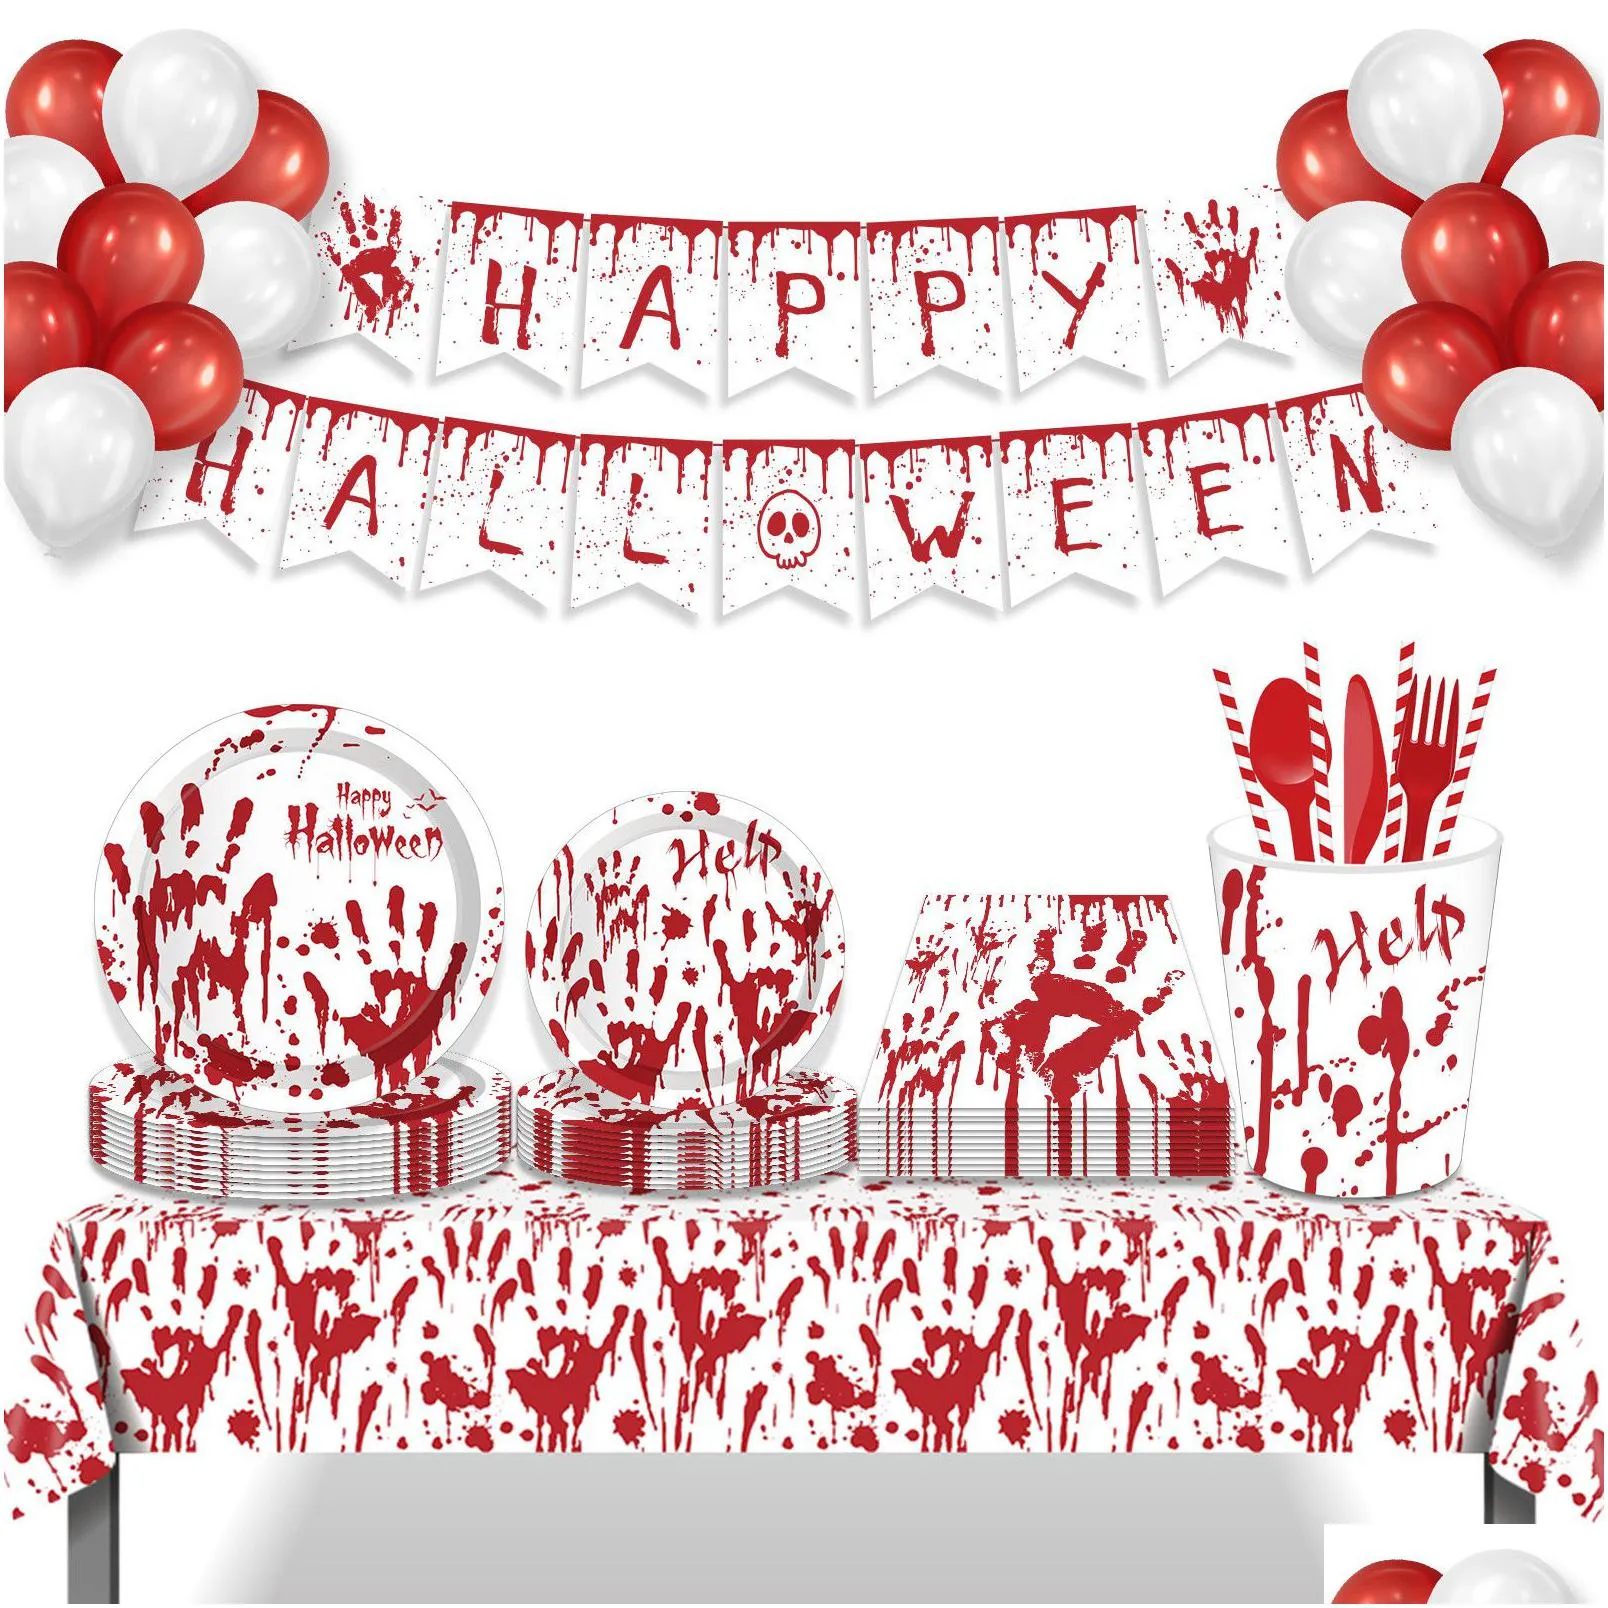 halloween blood hand bleeding paper plates party supplie plates and napkins birthday set party dinnerware serves 8 guests for plates, napkins, cups